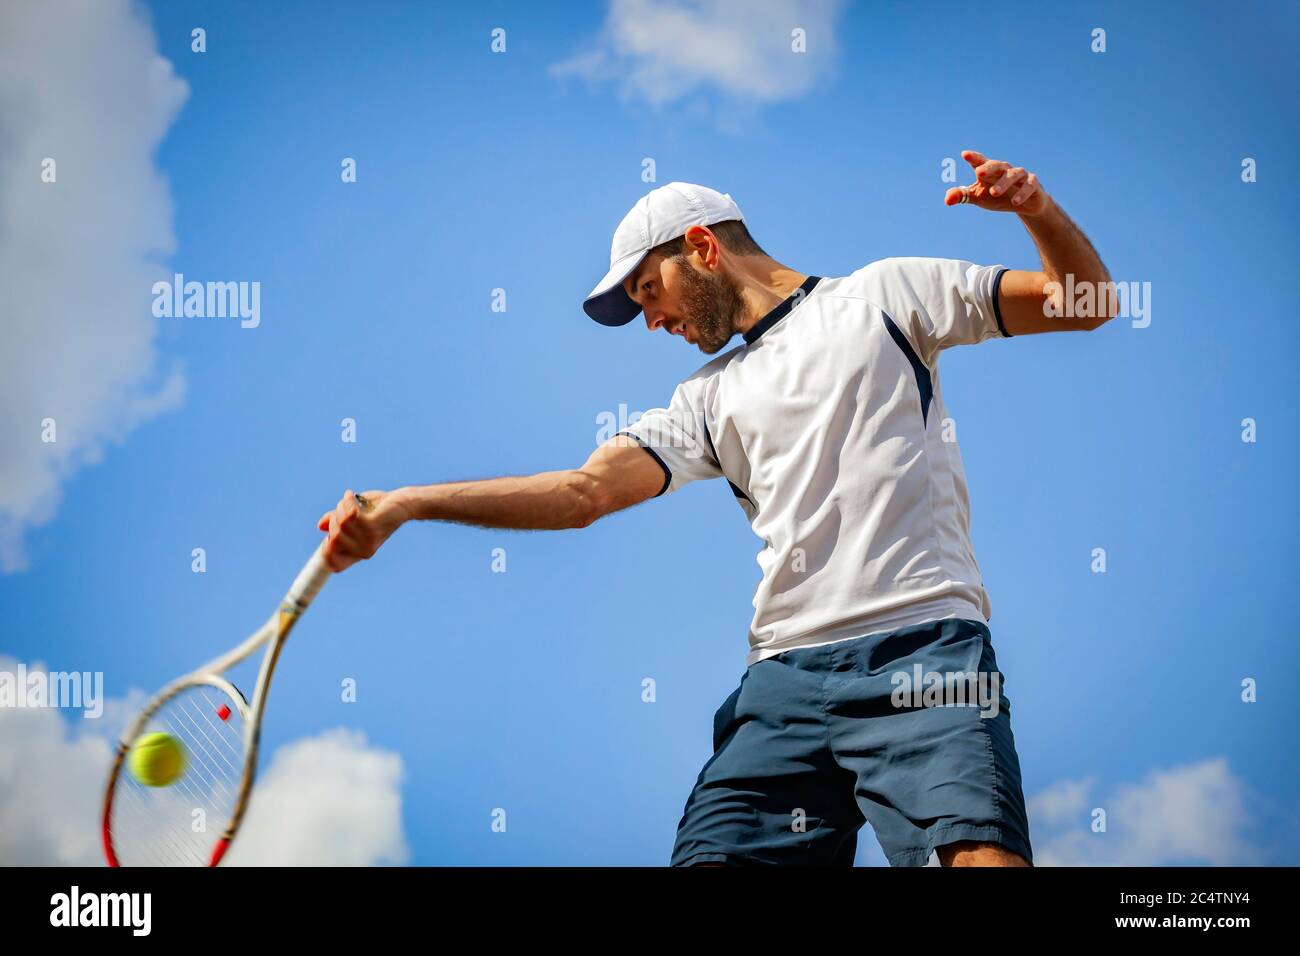 male tennis player in action Stock Photo